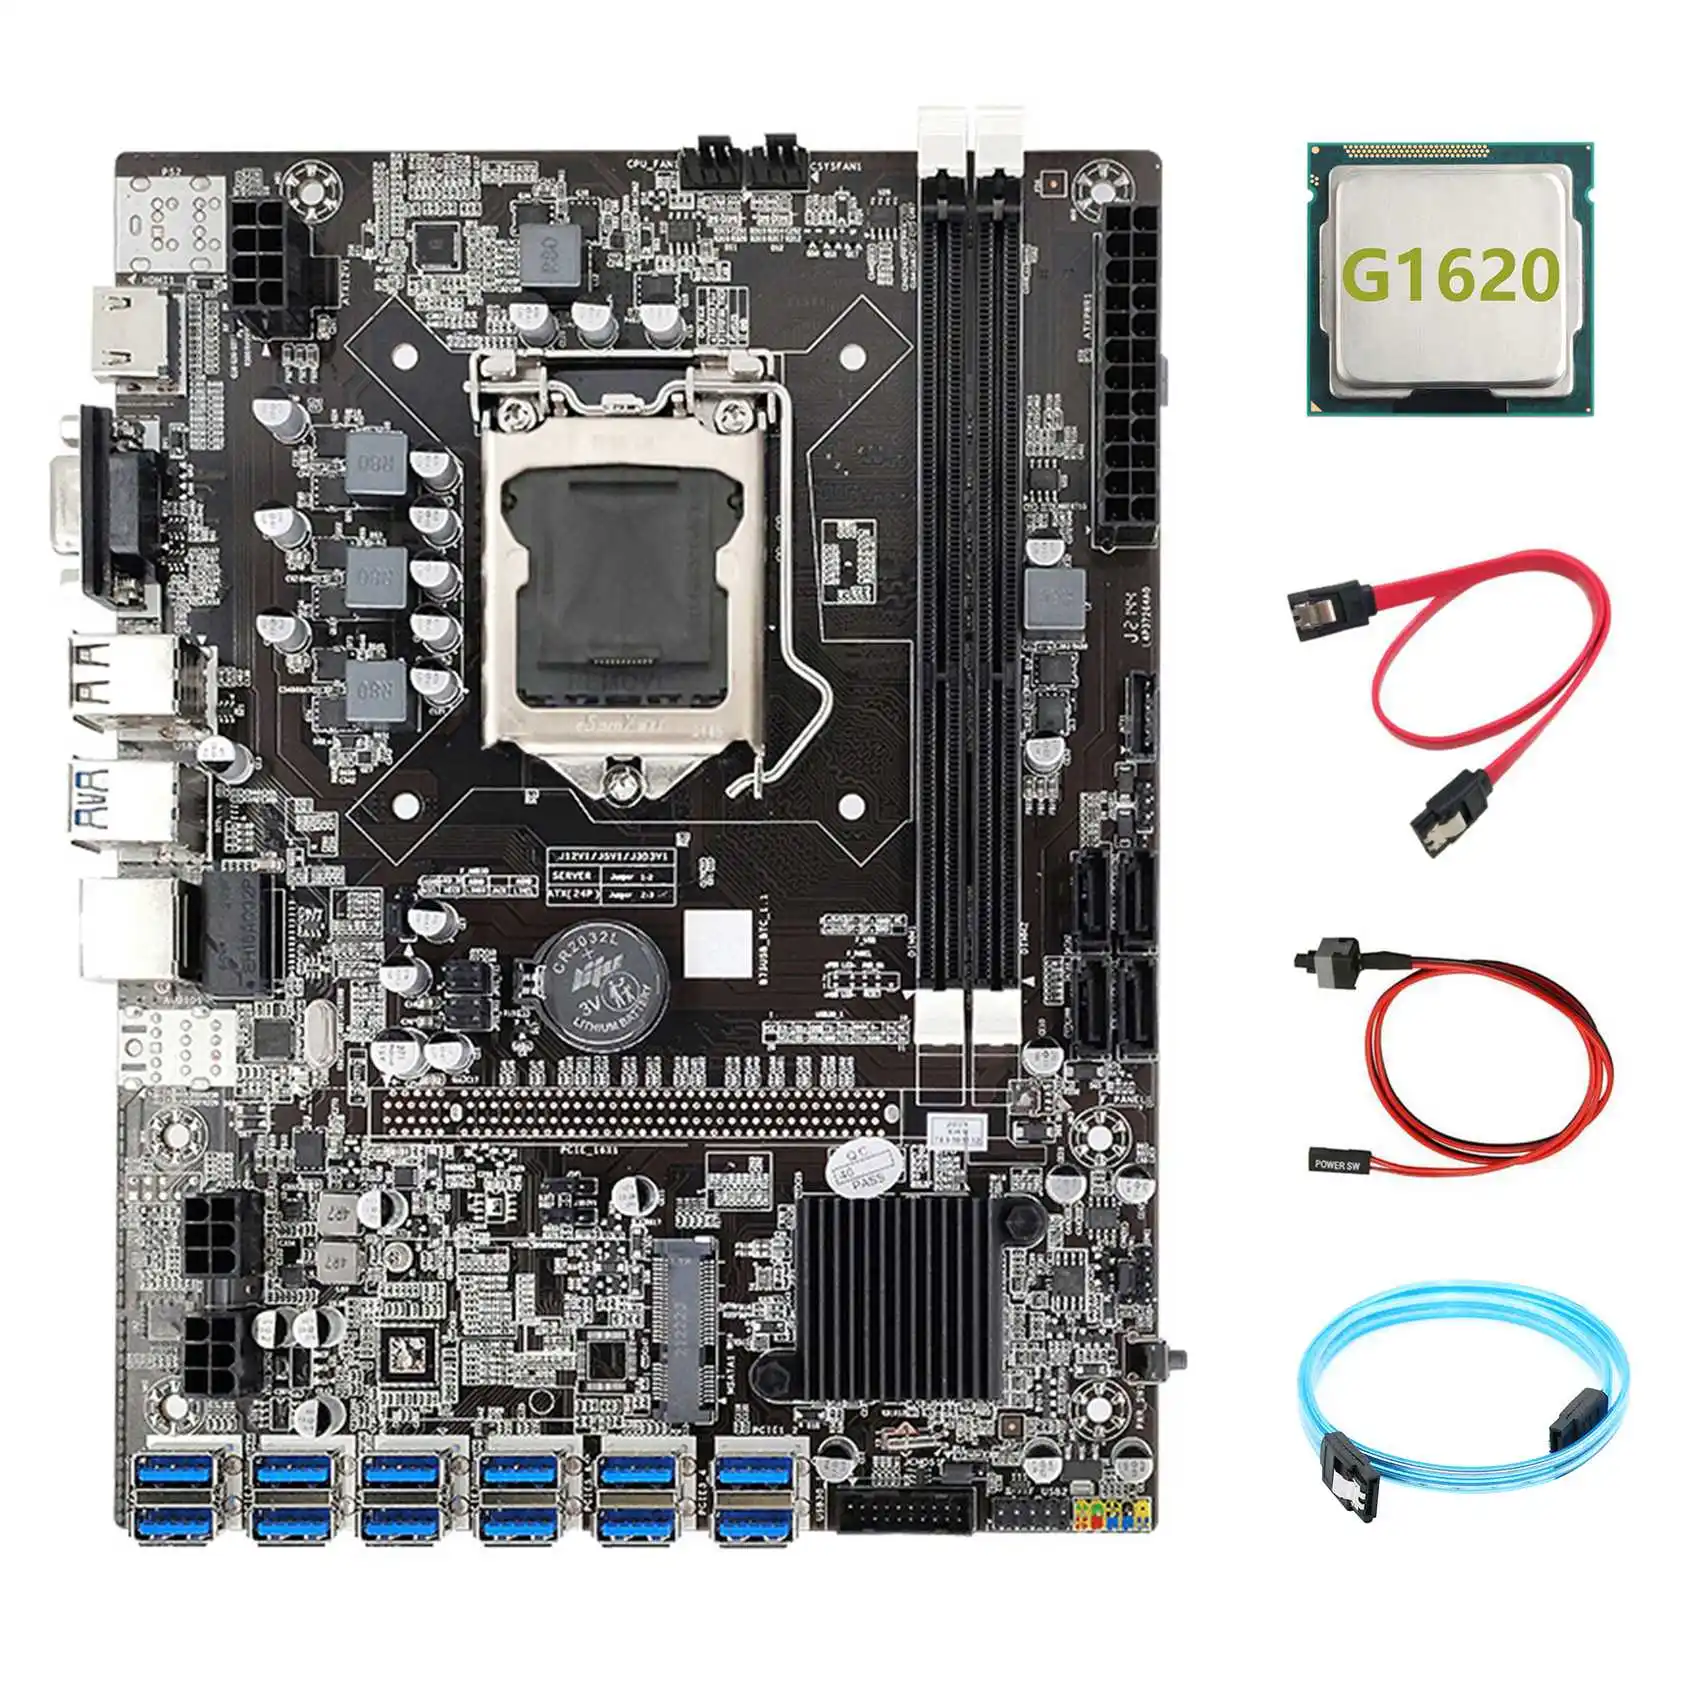 

B75 ETH Miner Motherboard 12 PCIE to USB+G1620 CPU+SATA3.0 Serial Port Cable+SATA Cable+Switch Cable LGA1155 Motherboard